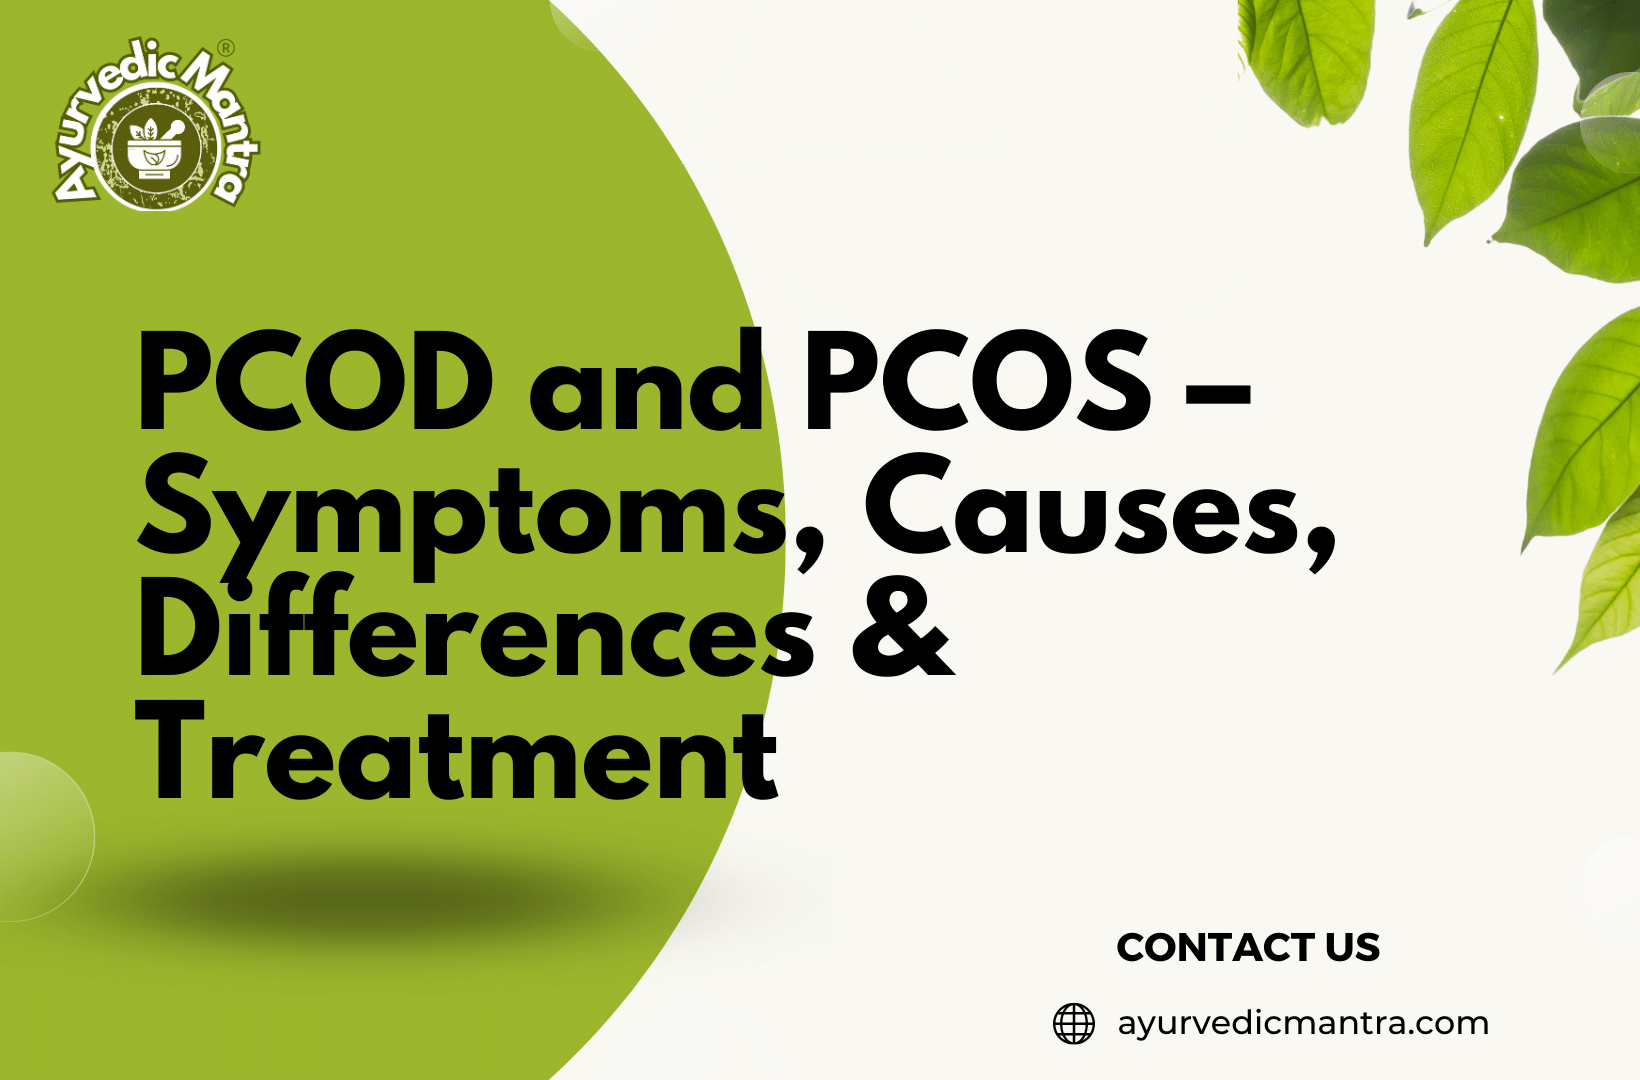 PCOD and PCOS – Symptoms, Causes, Differences & Treatment